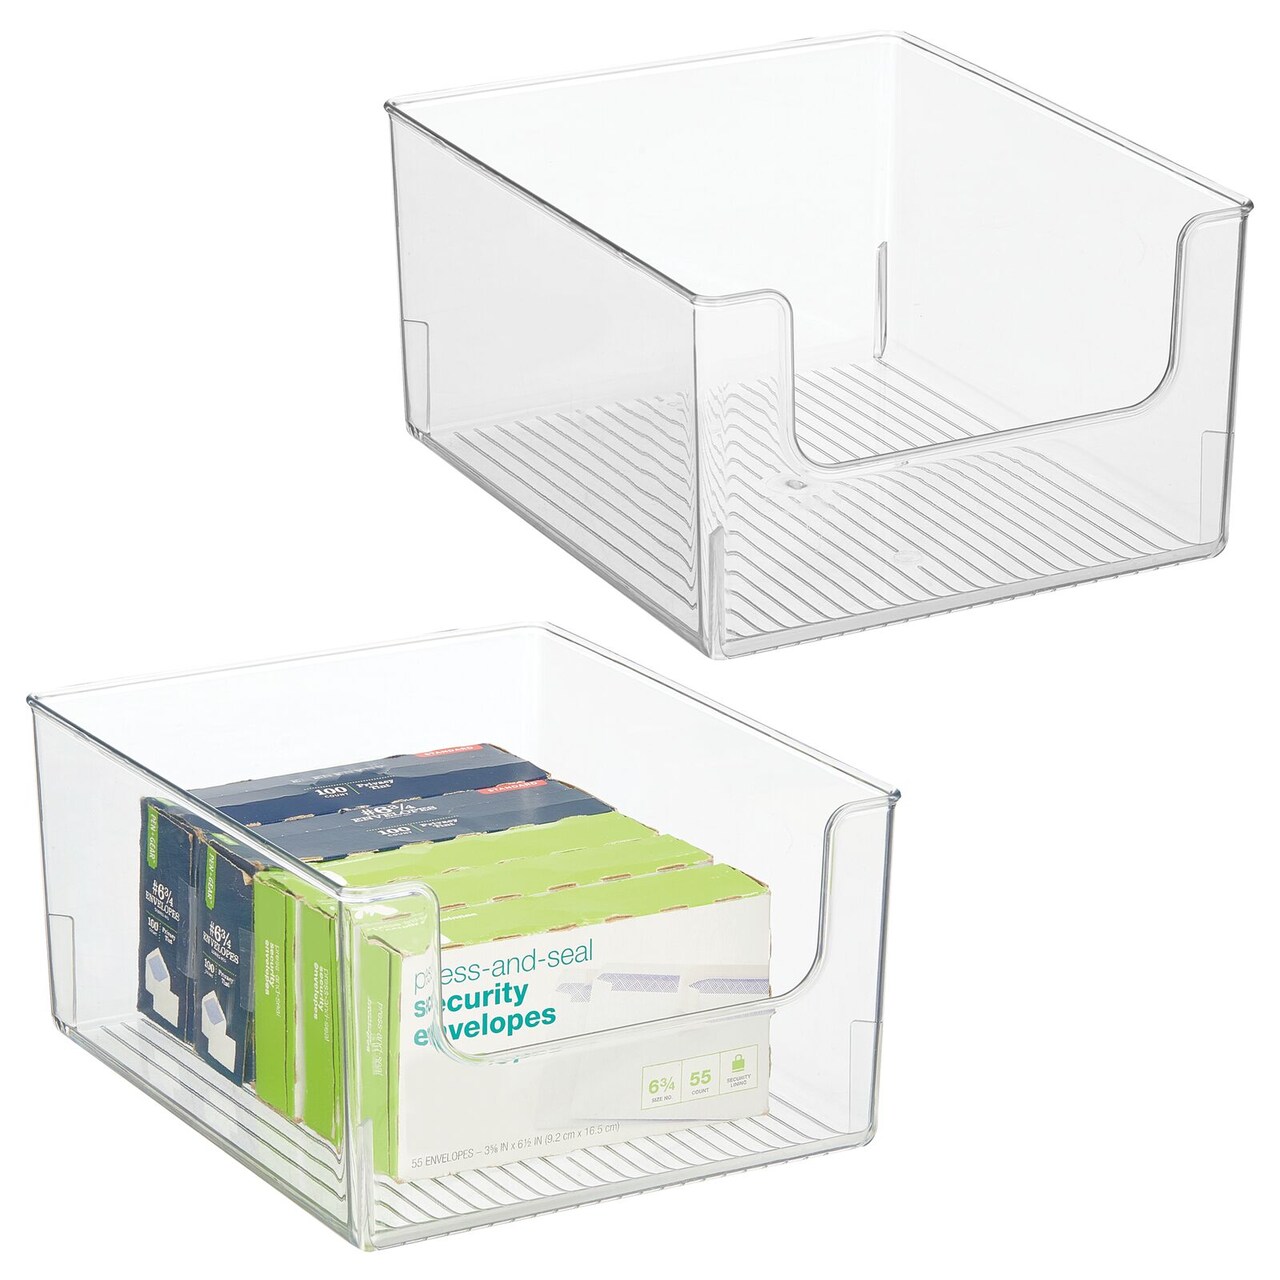 mDesign Plastic Home Office Storage Bin Container, Desk Organizer, 2 Pack,  Clear